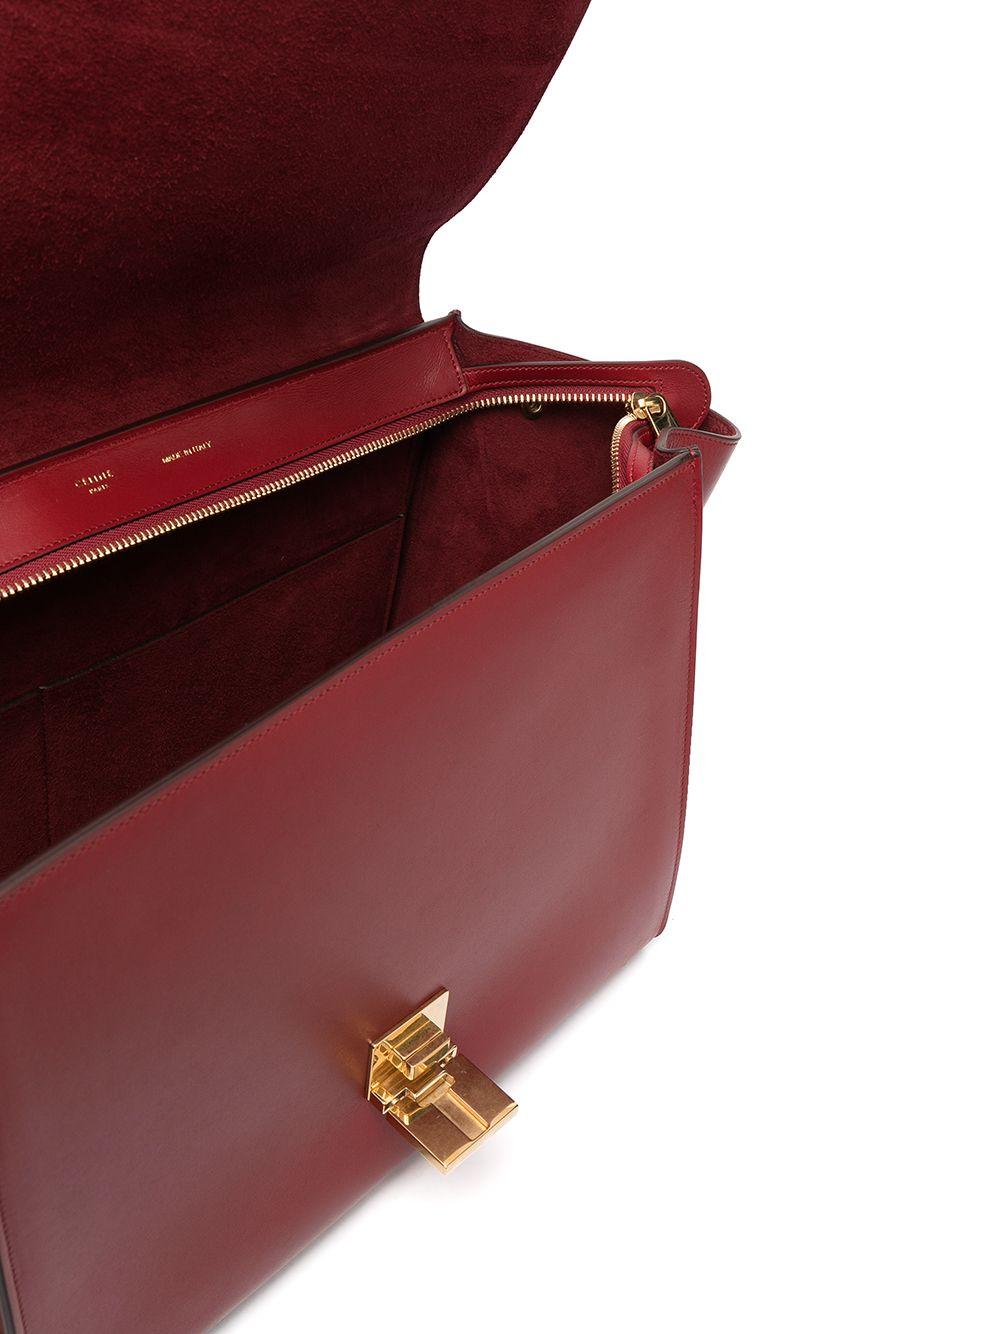 Exquisitely minimalist and modern, this brand new Céline Trapeze handbag embodies the sensibility of Phoebe Philo's Céline. Its smooth, burgundy red leather is quietly accented with a gold-toned clasp, and features has one zipped pocket on the back